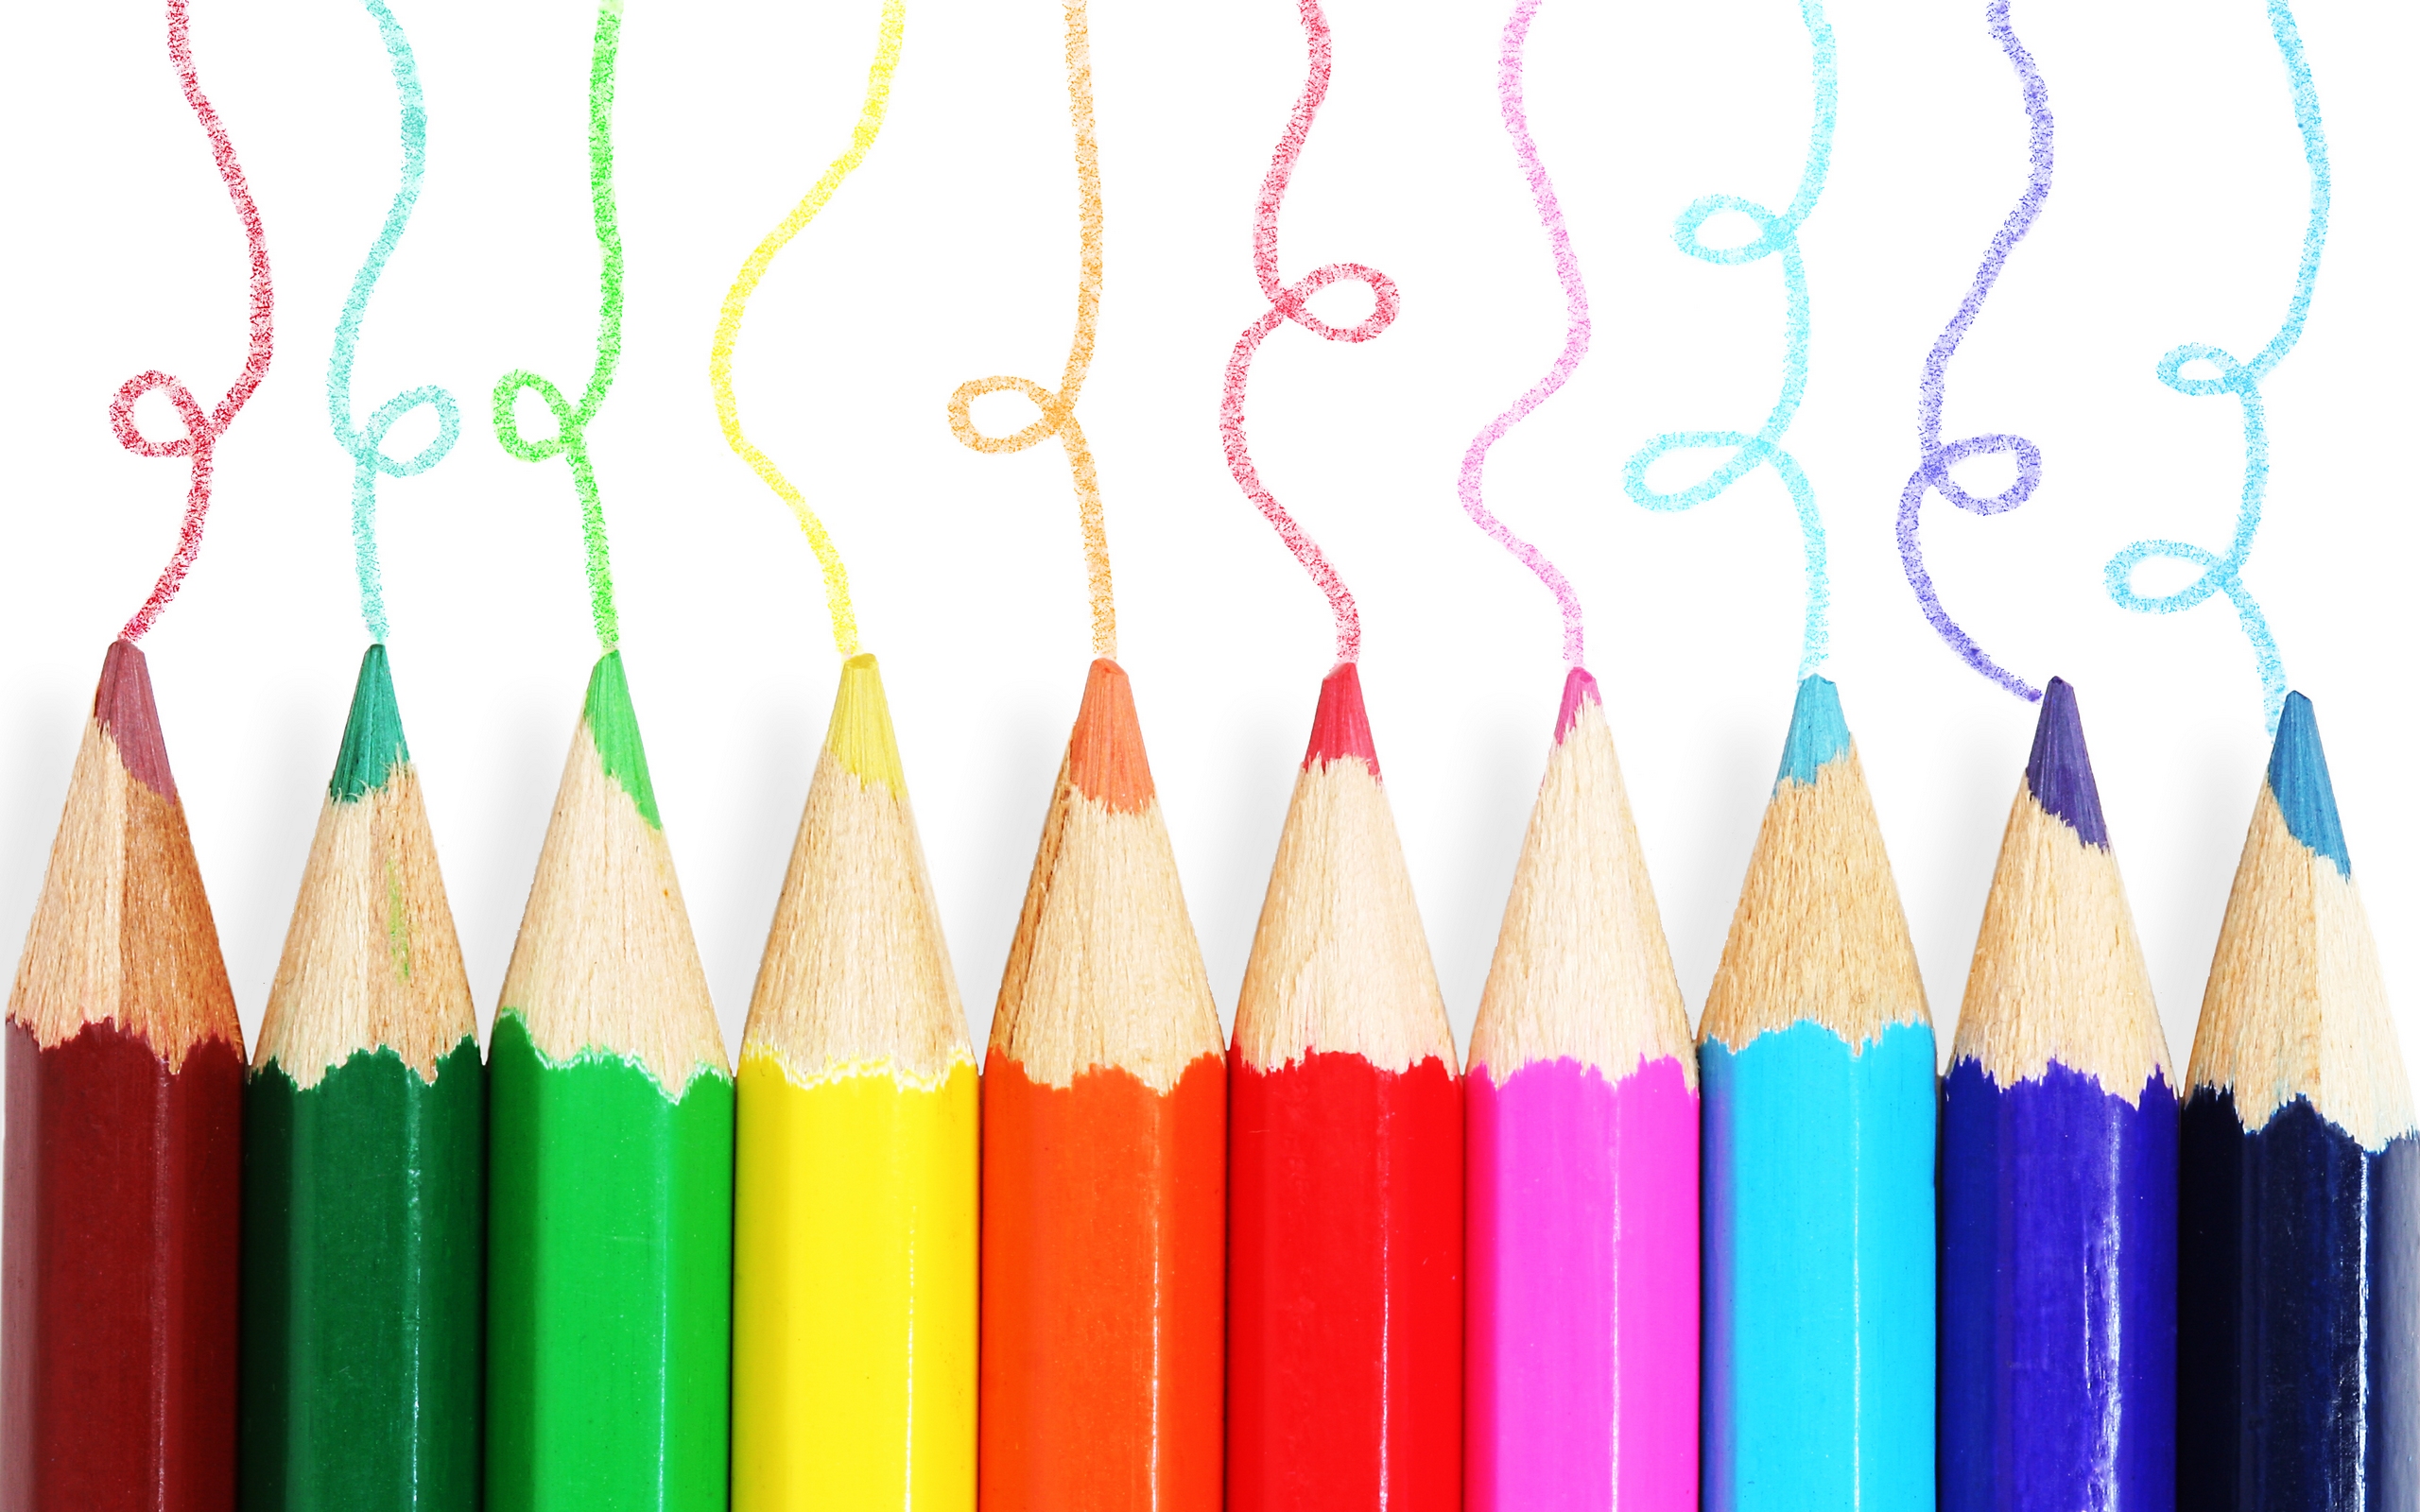 Pencils Image Colored HD Wallpaper And Background